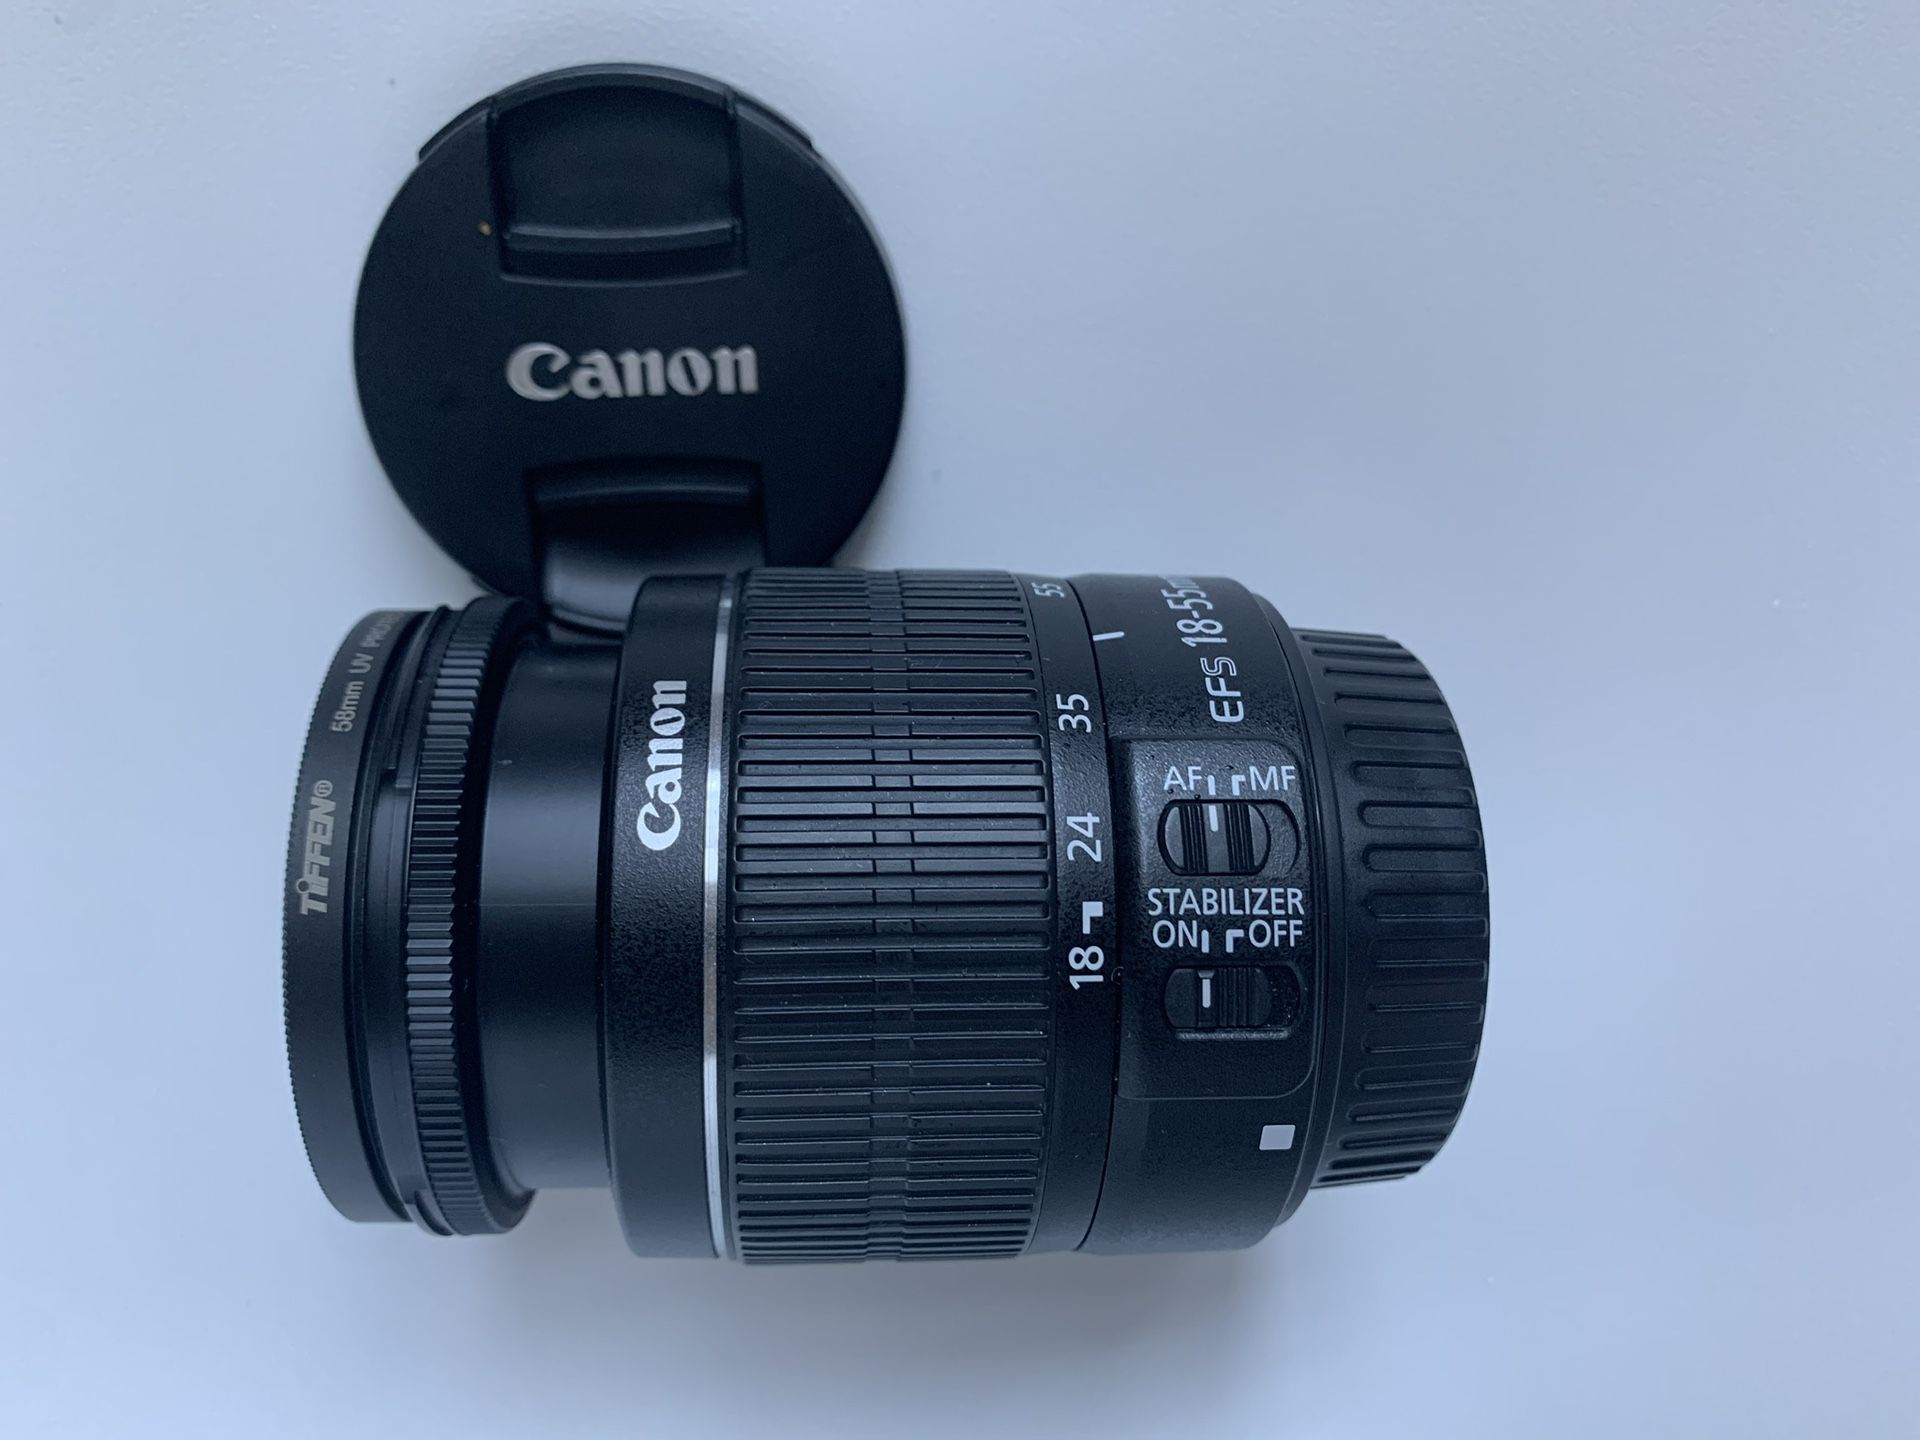 Canon lens 18-55mm image stabilizer